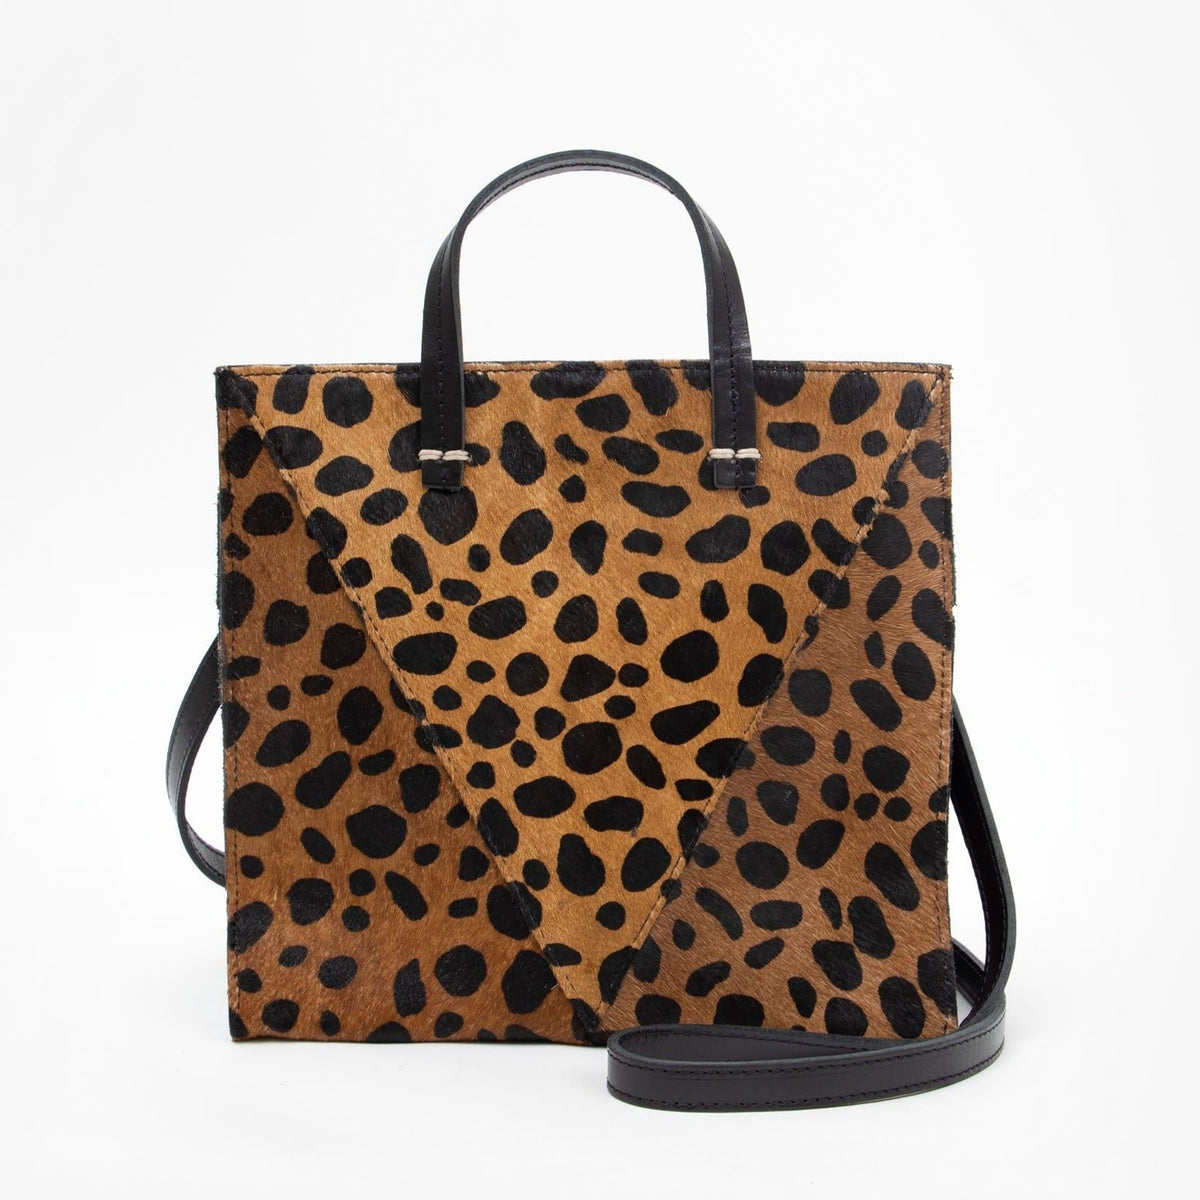 Clare V. Petit Simple Tote - LEOPARD on Garmentory